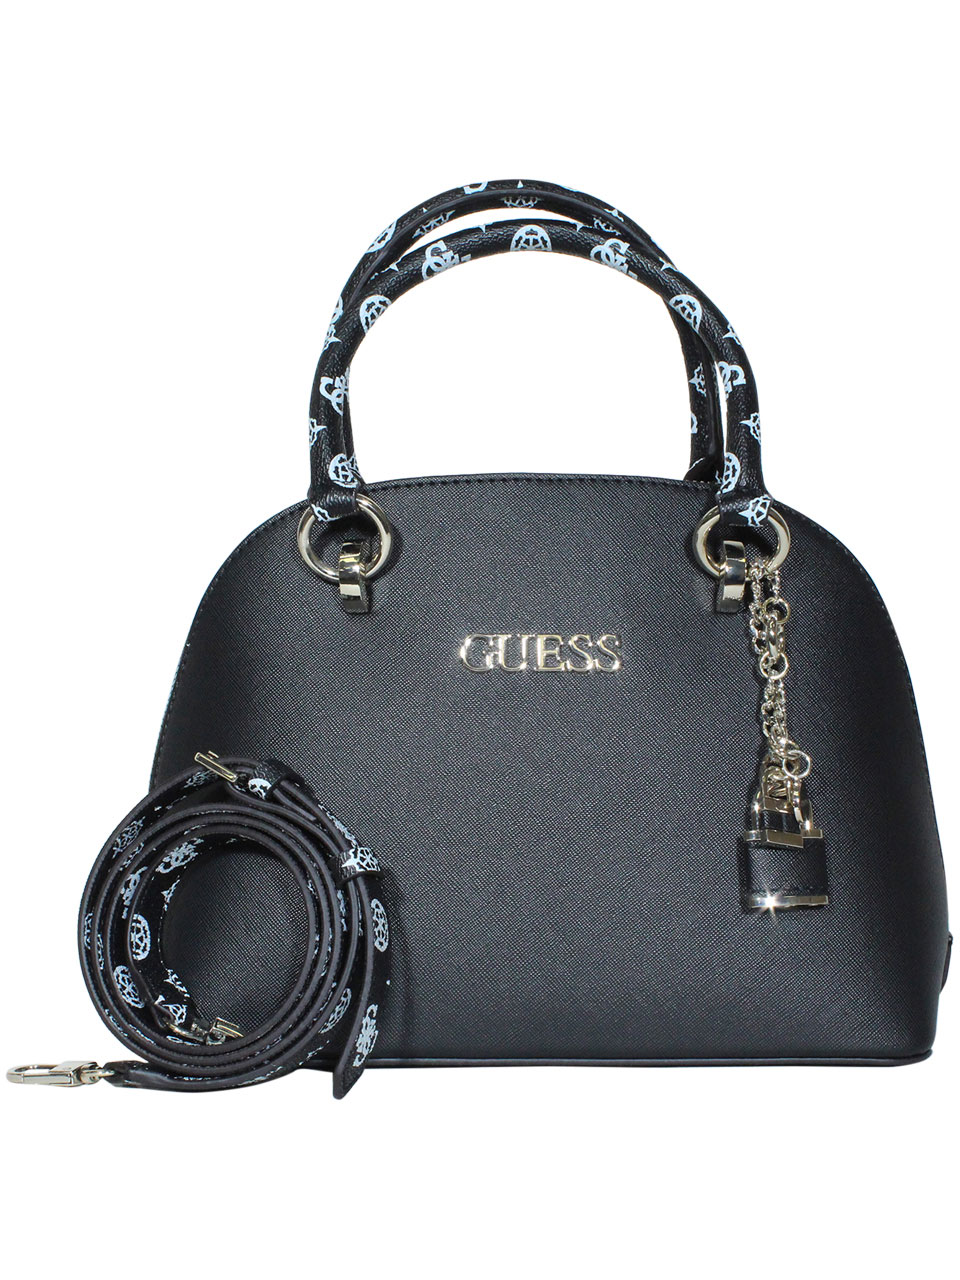 Satchel Bags & Purses | All Styles, Sizes & Colors | GUESS